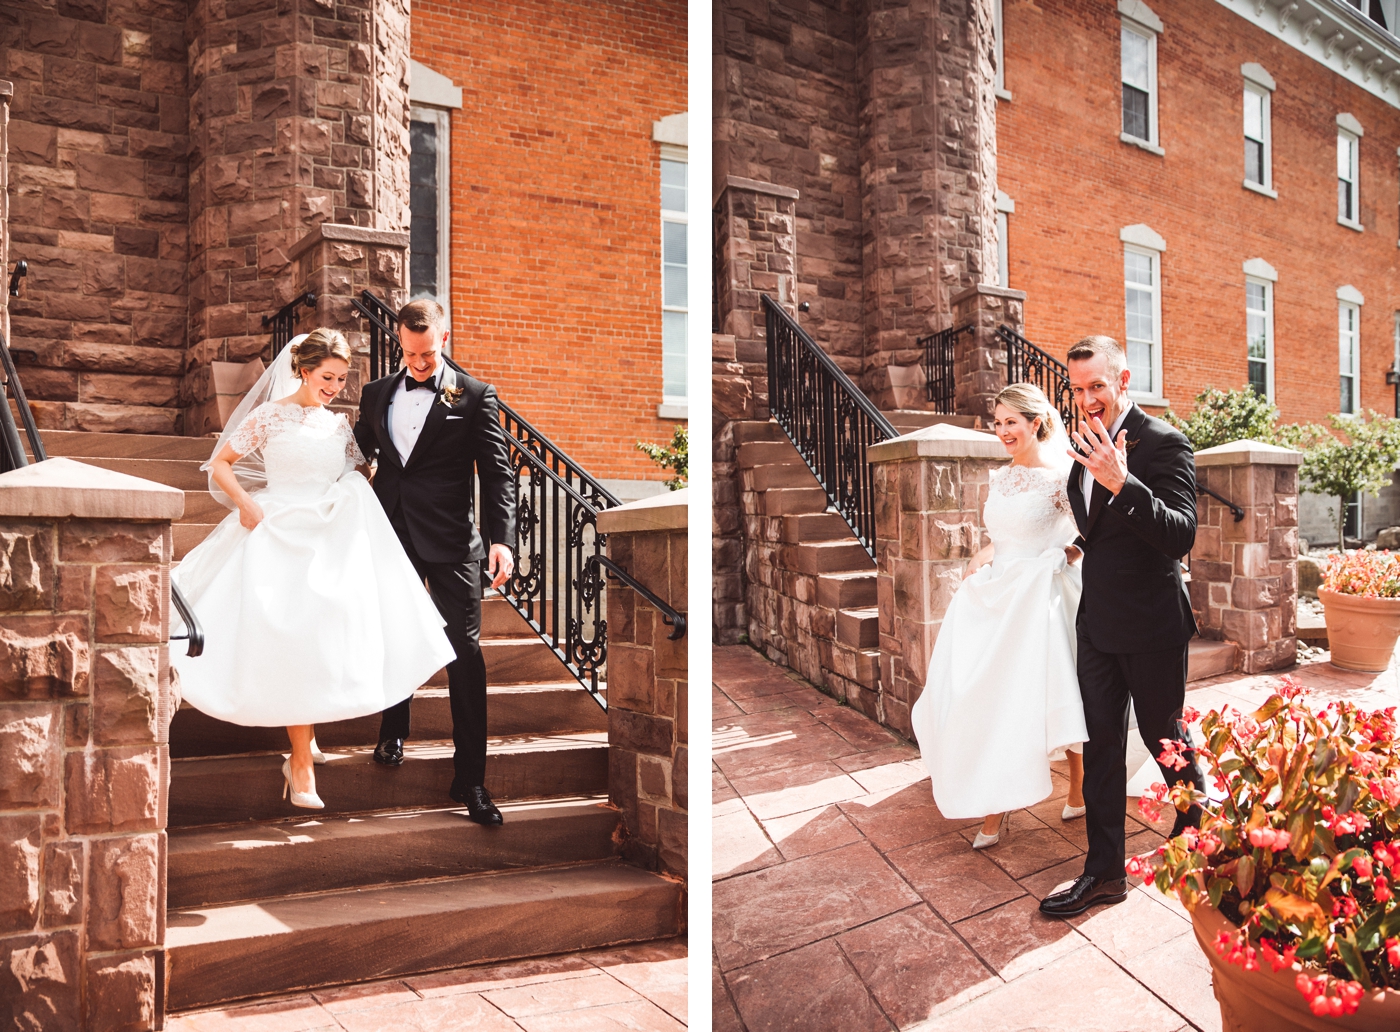 Wedding Ceremony at Chapel Hill in Rochester, New York